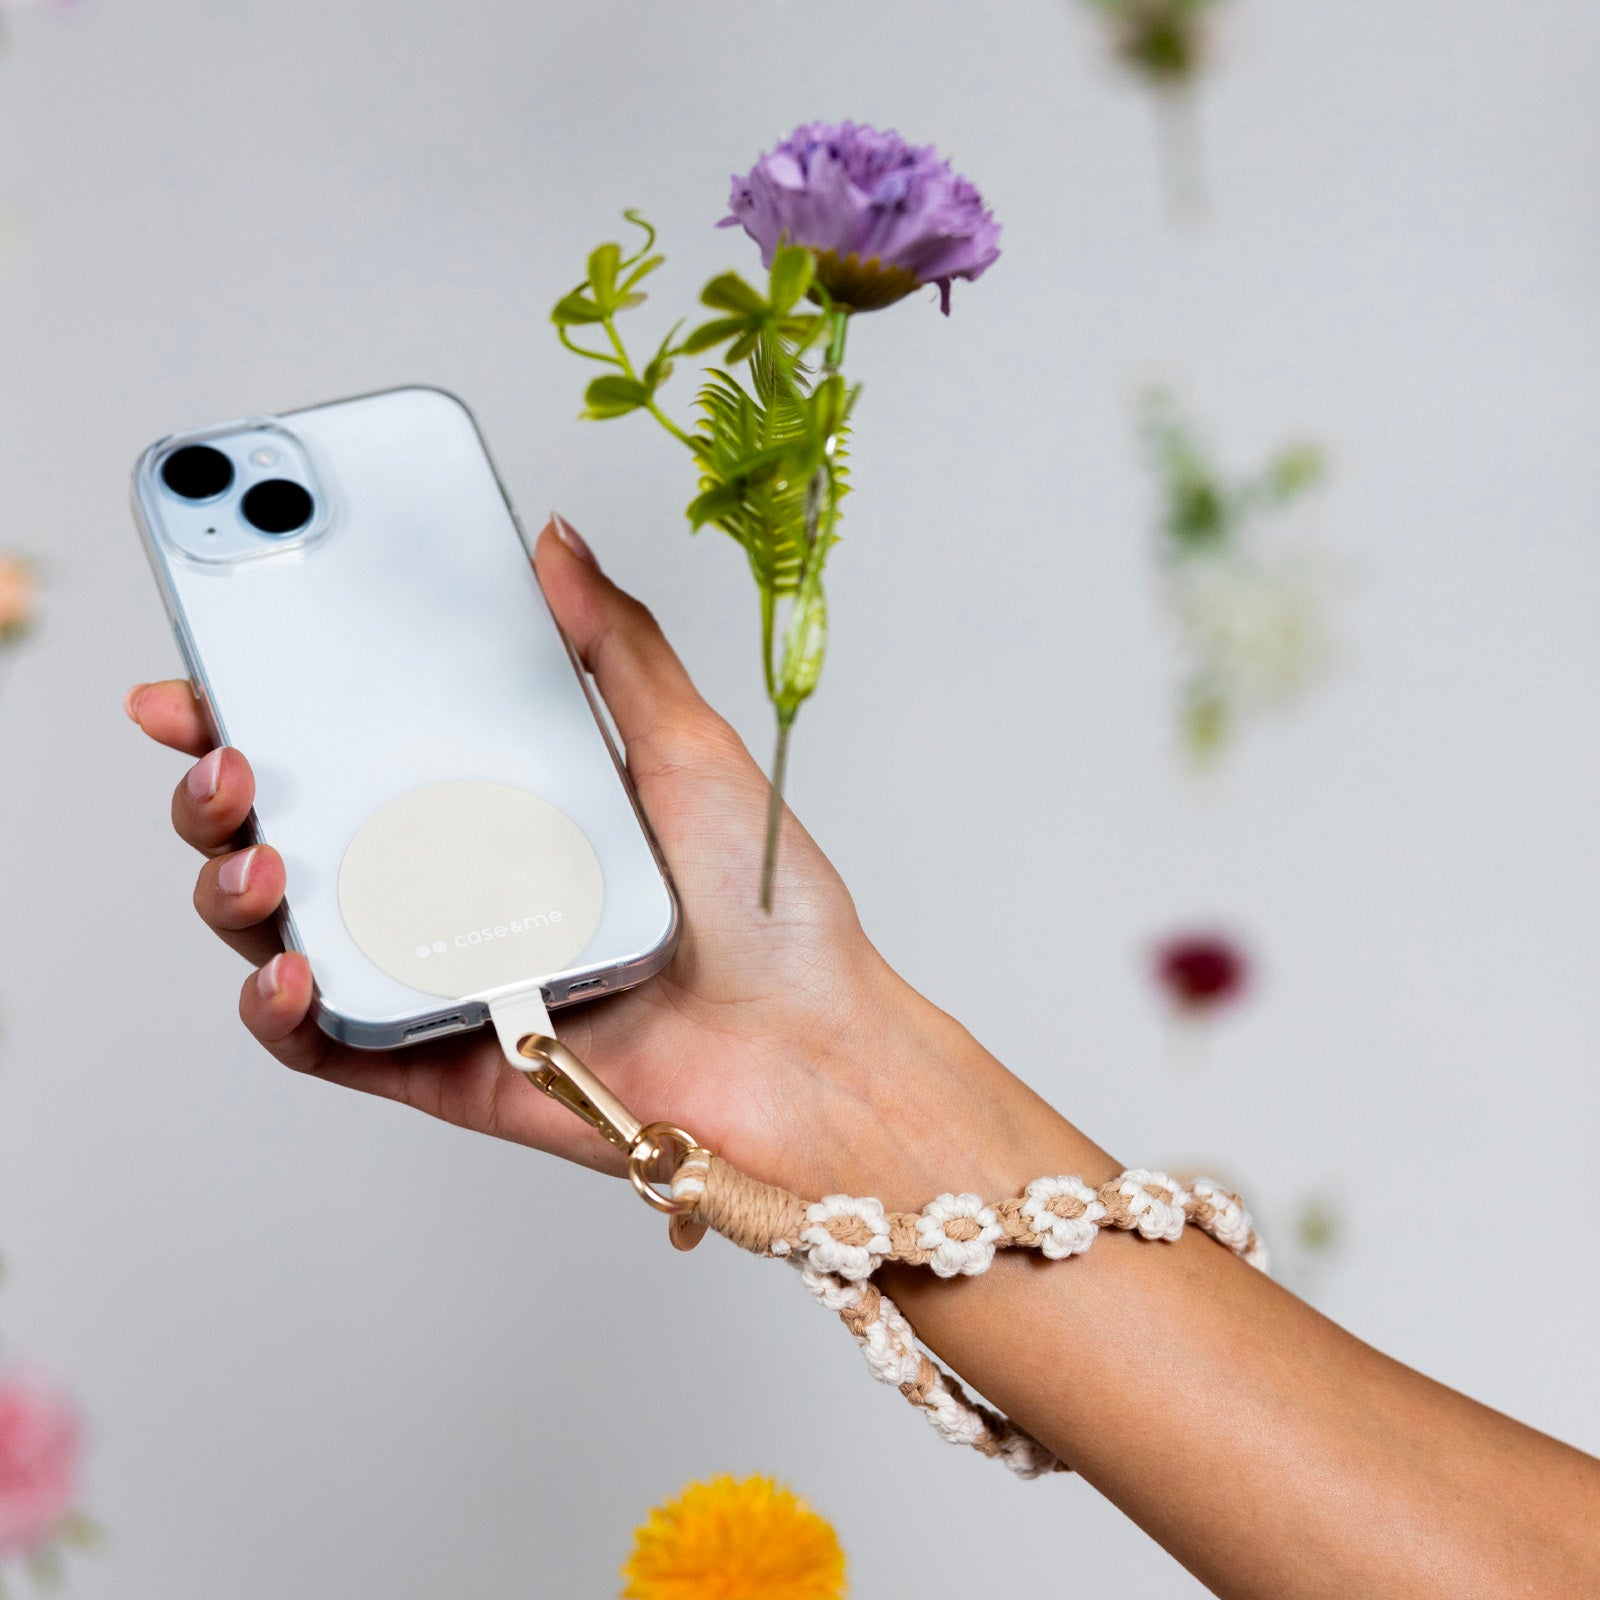 Coco smartphone bracelet with flowers